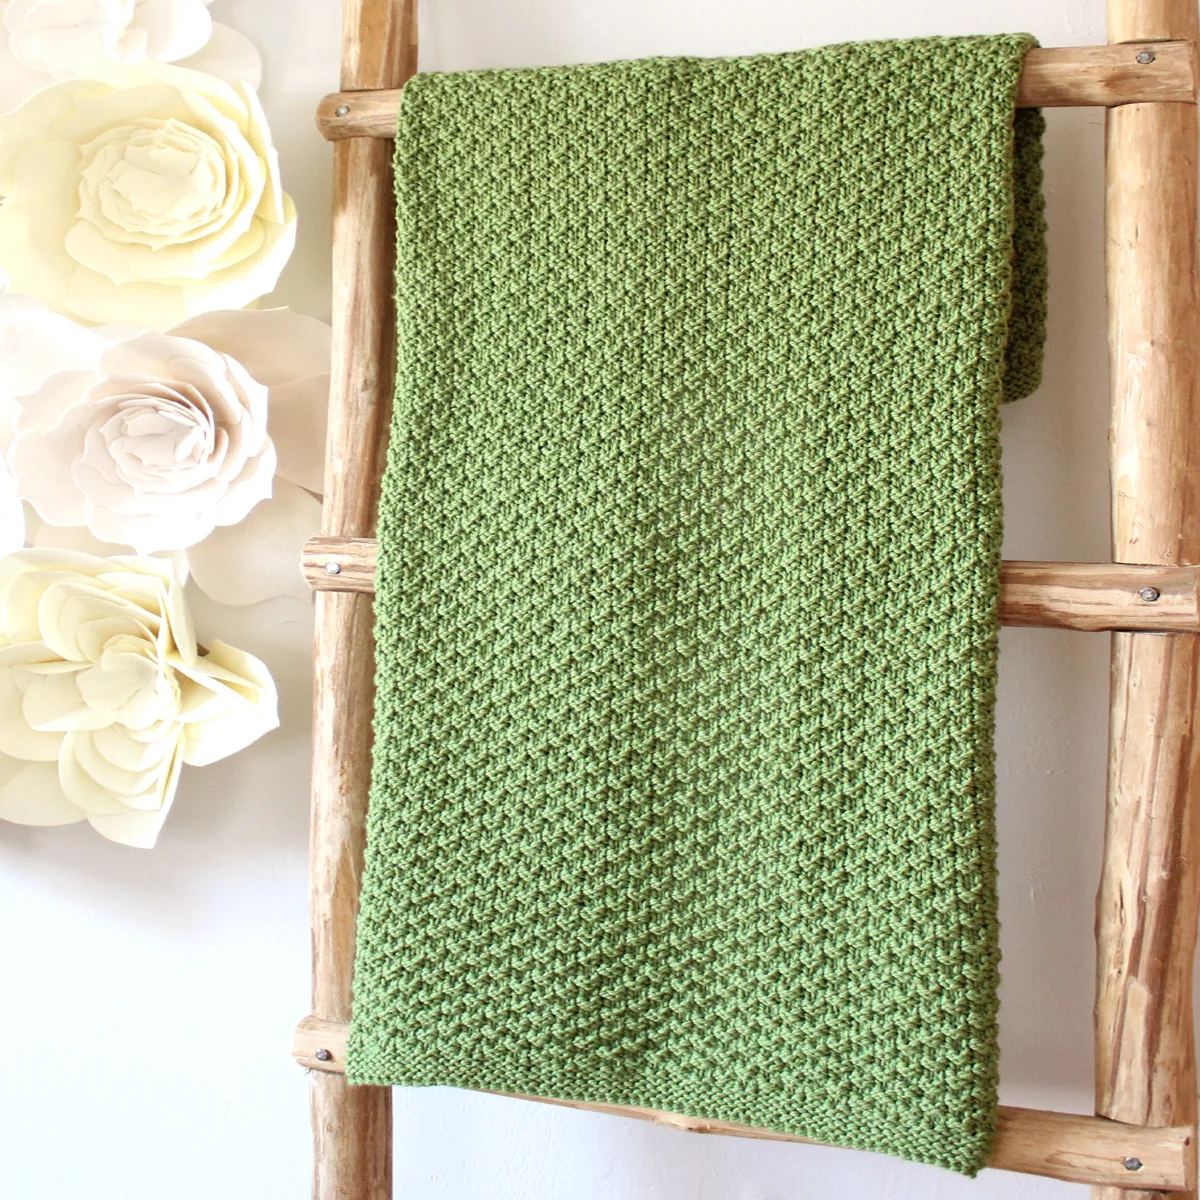 Wooden ladder with Moss Landing knitted blanket by Studio Knit in green yarn color.